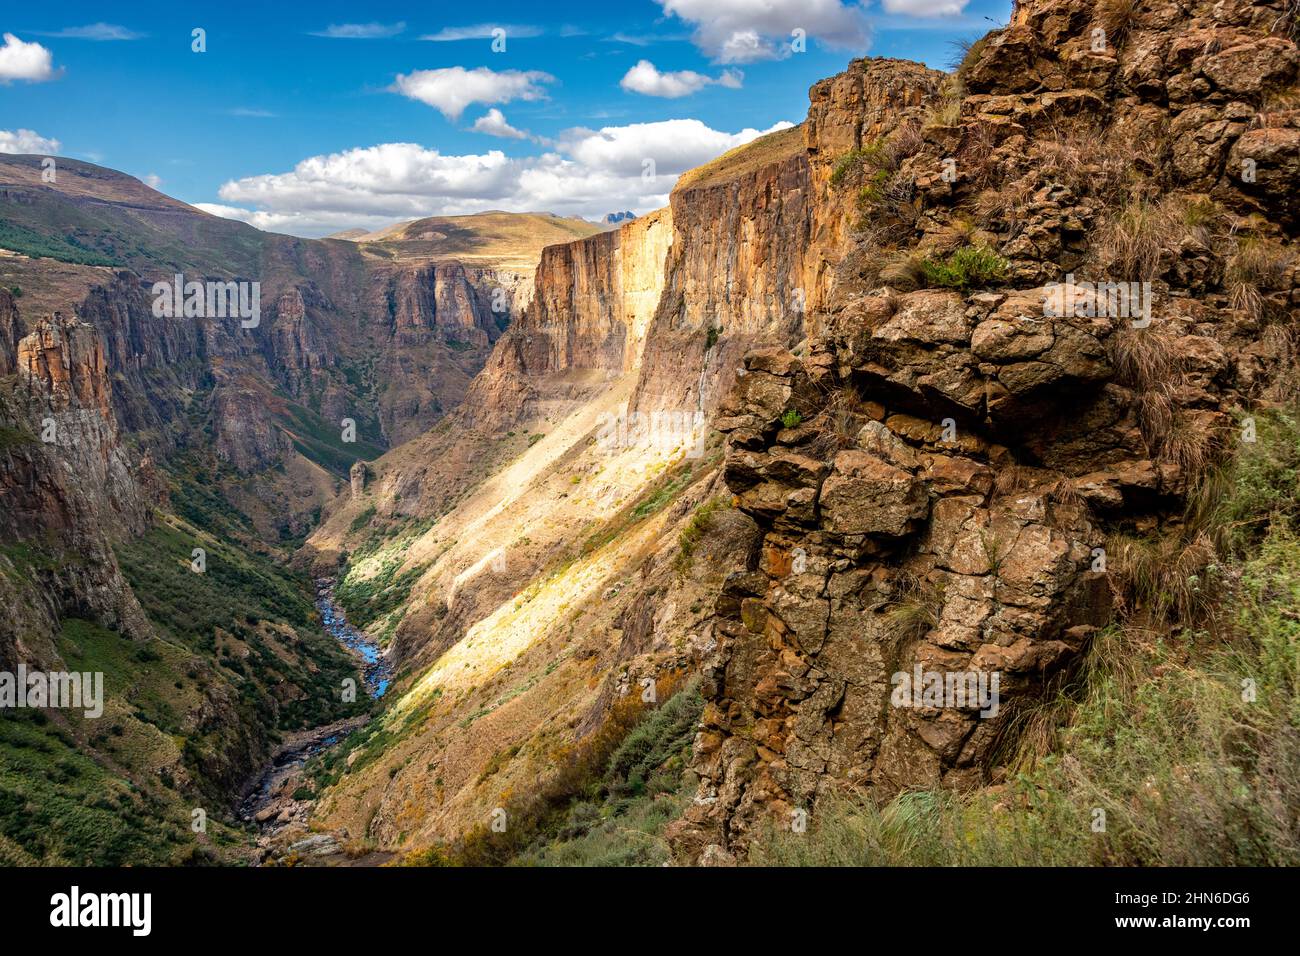 Travel to Lesotho. A view of the Maletsunyane River Canyon in the Semonkong region Stock Photo